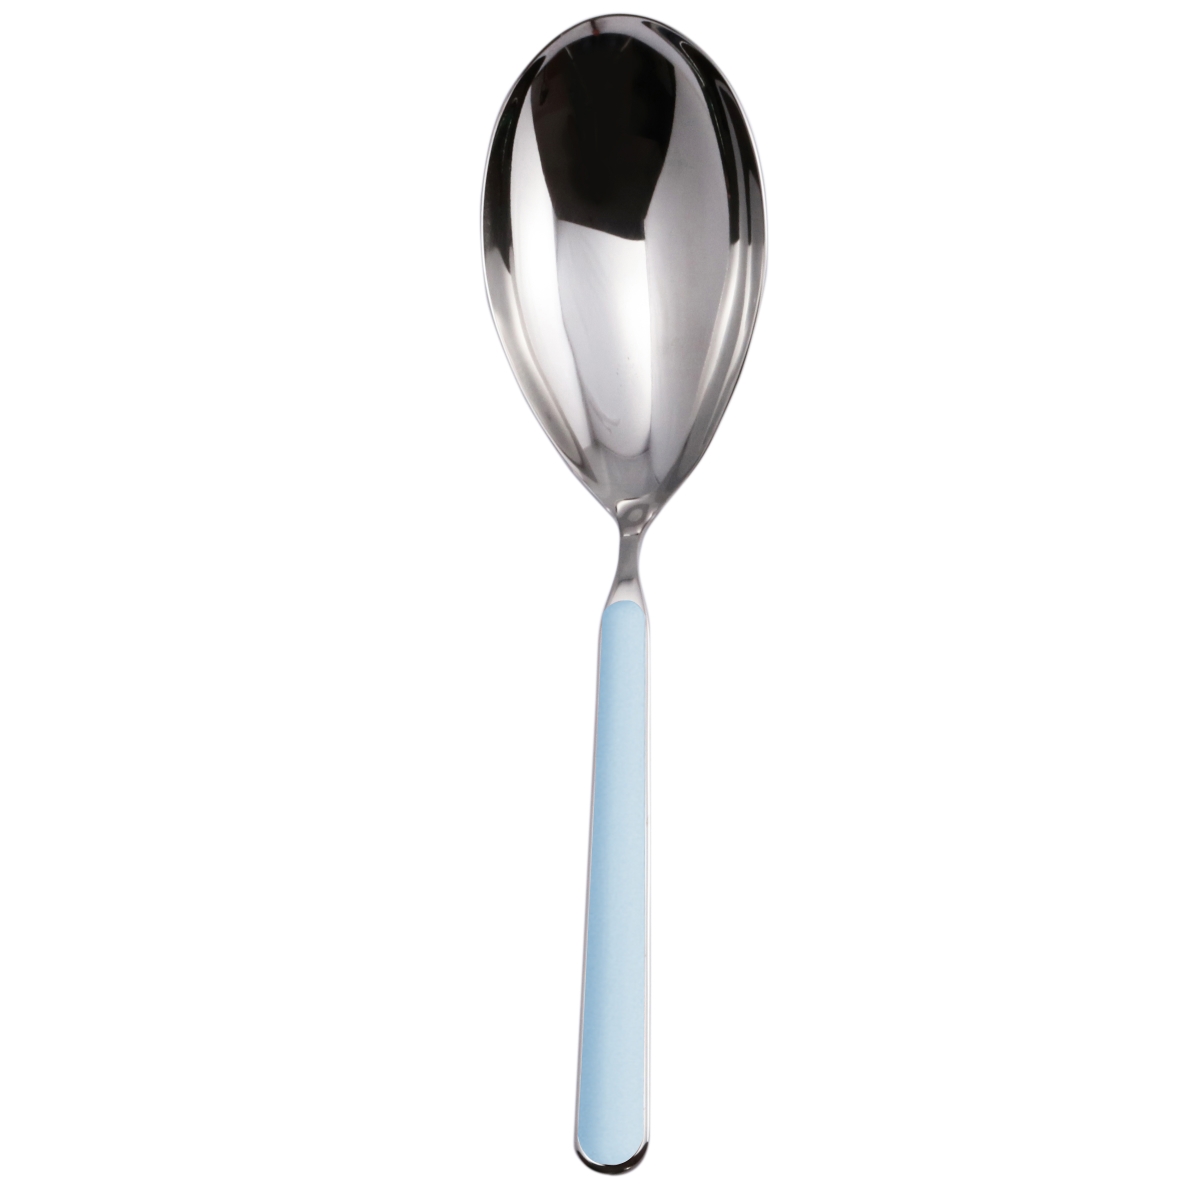 10a61143 Fantasia Spoon For Risotto, Light Blue